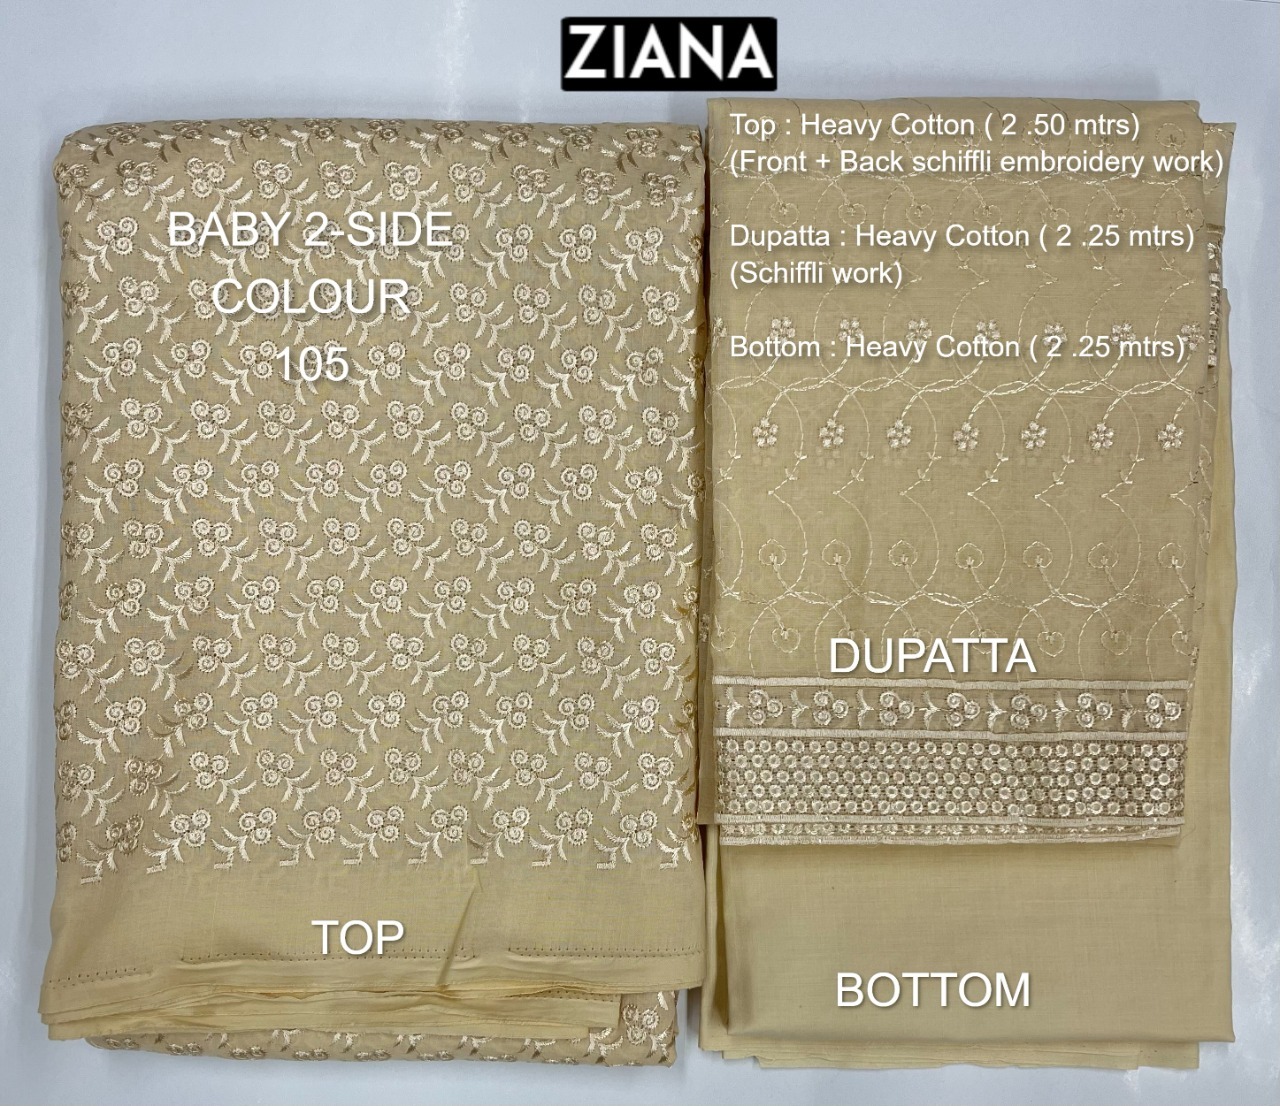 ziana baby 2 side colour 105 heavy cotton attrective embroidery salwar suit colour set